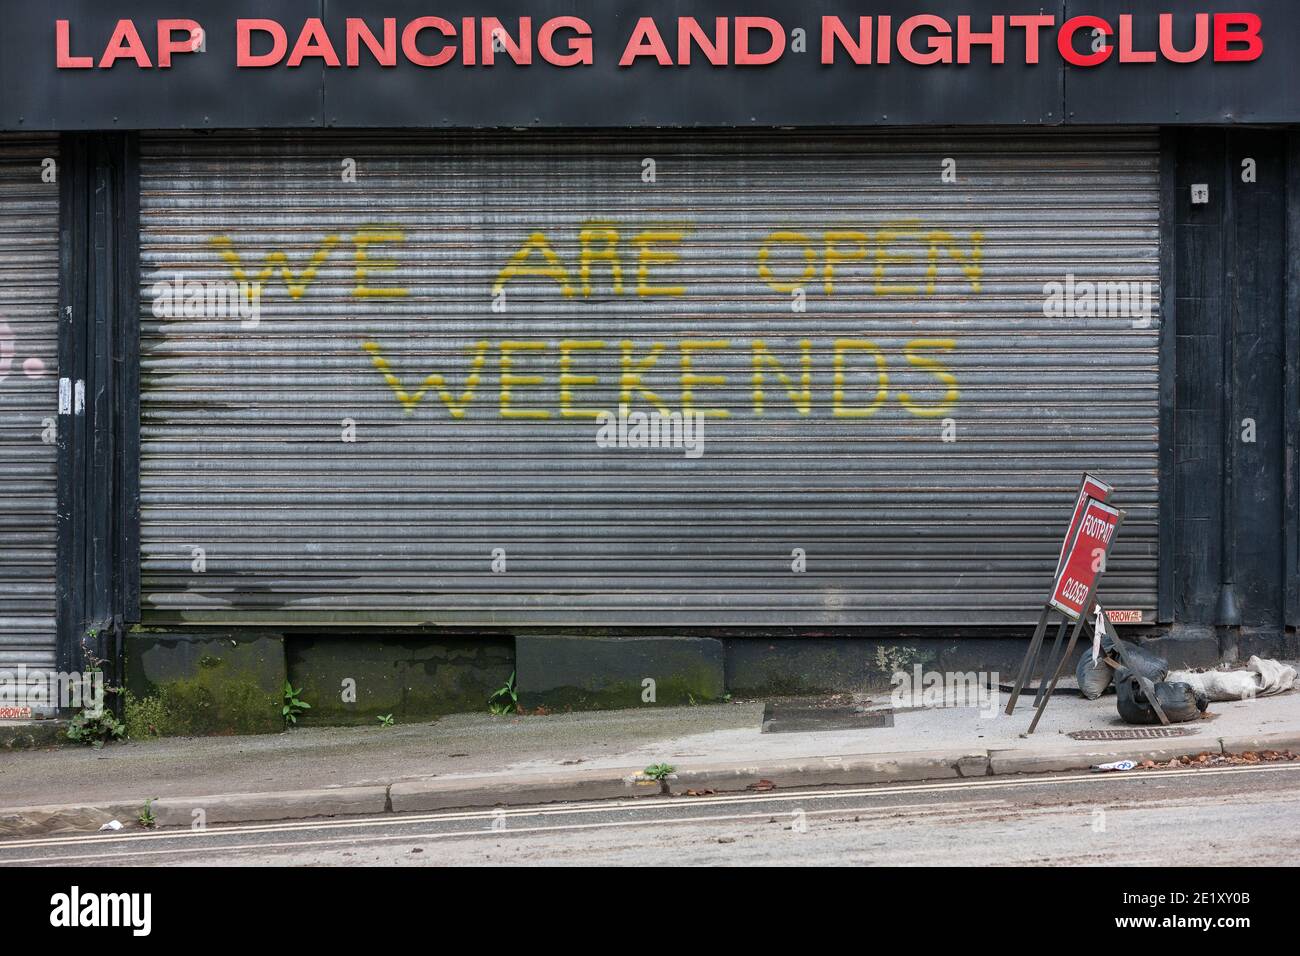 Bolton, UK - September 24 2020: A shuttered lap dancing club in Bolton. The infection rate in Bolton is still over 200 per 100,000 despite two weeks of additional local lockdown measures. Stock Photo